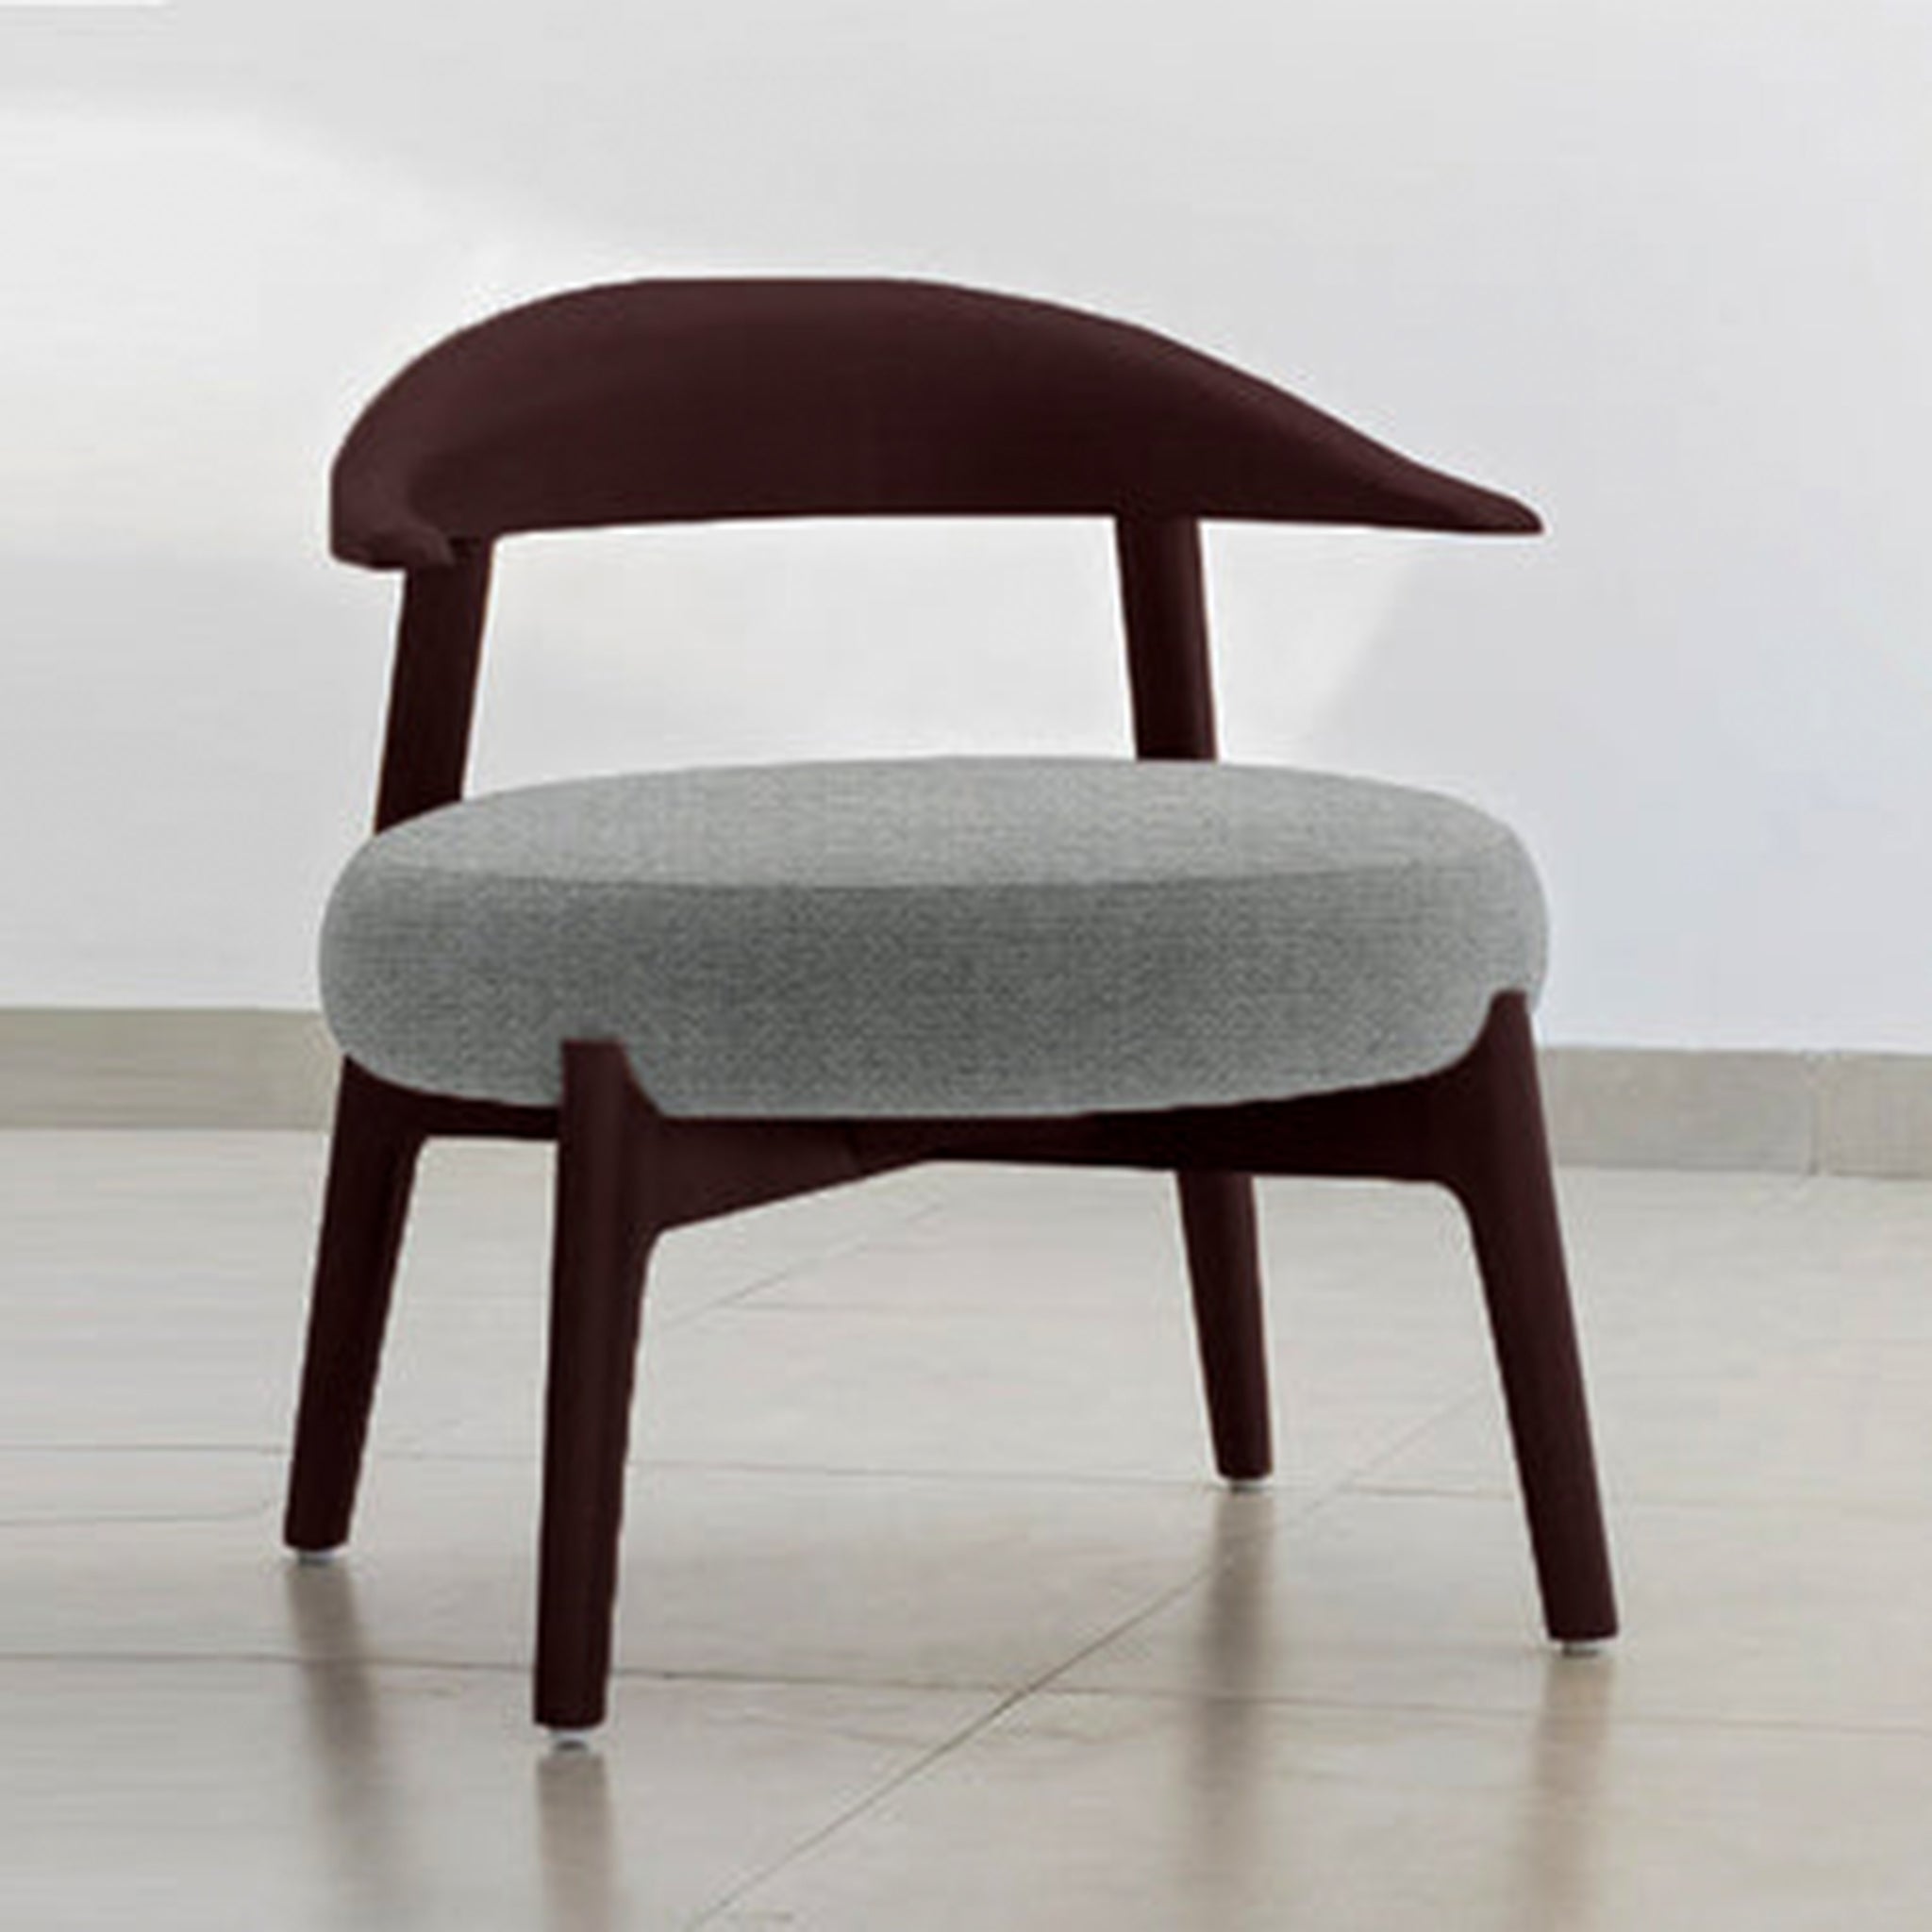 "The Hyde Accent Chair with sleek wooden backrest and cushioned seat"